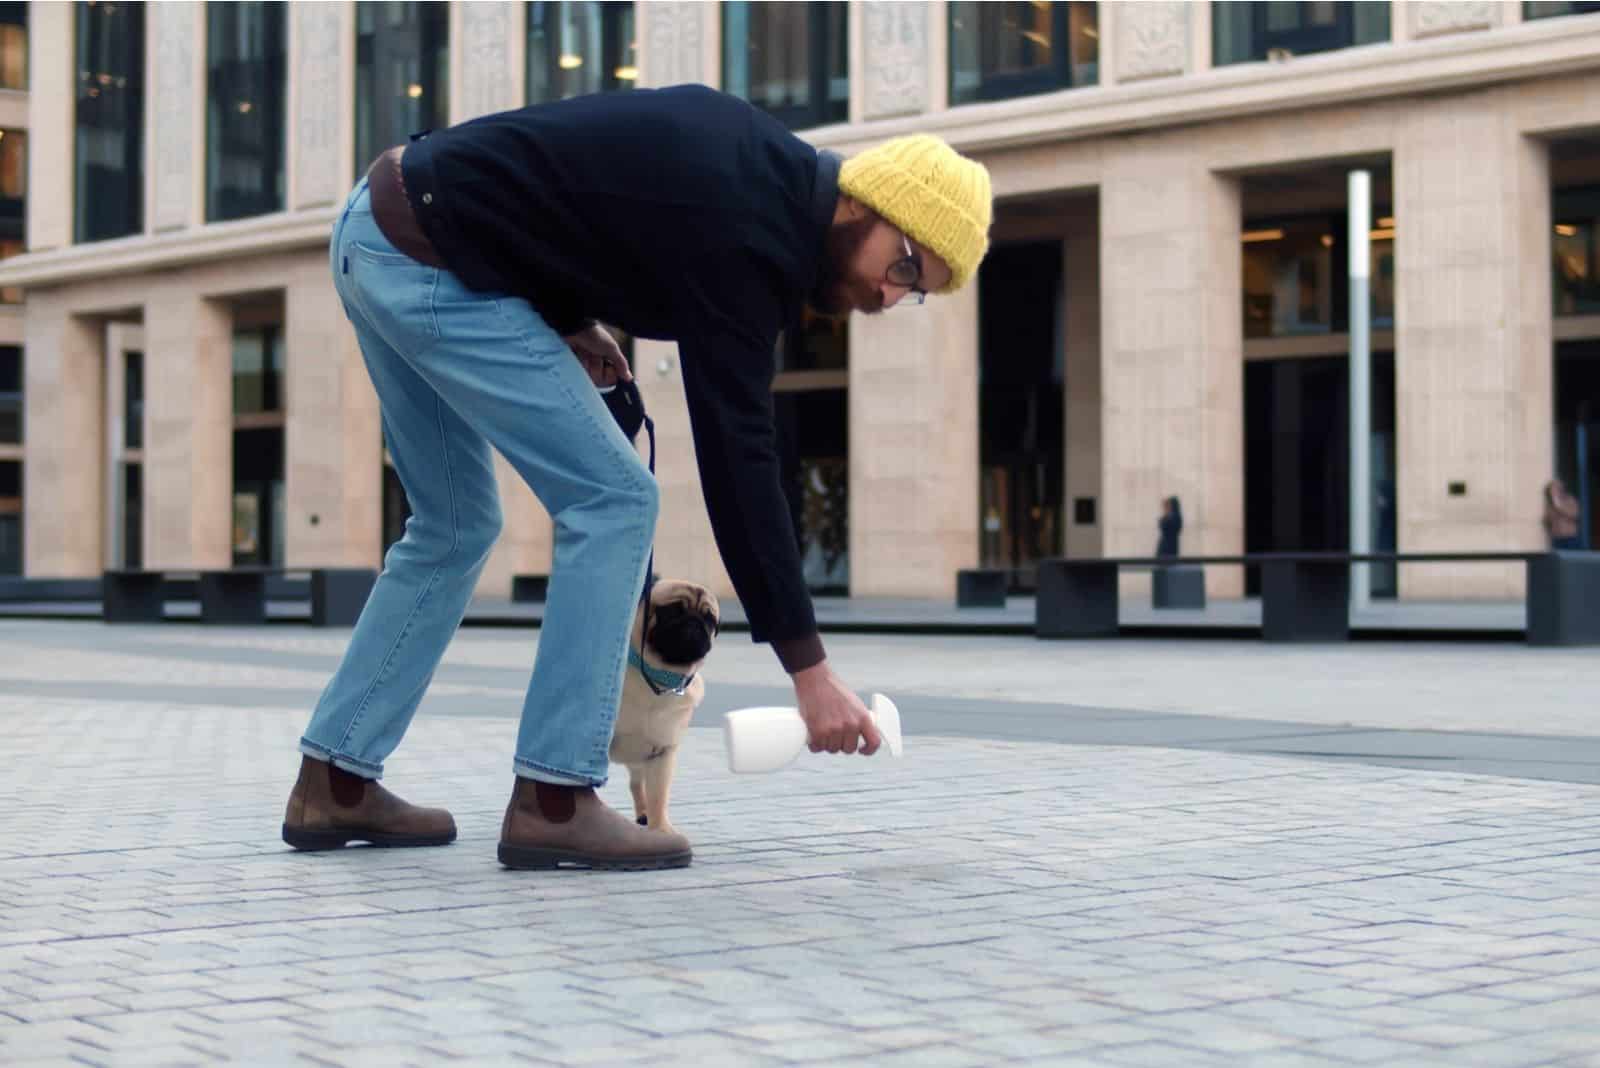 man bending down and cleaning the pug's pee on the pavement